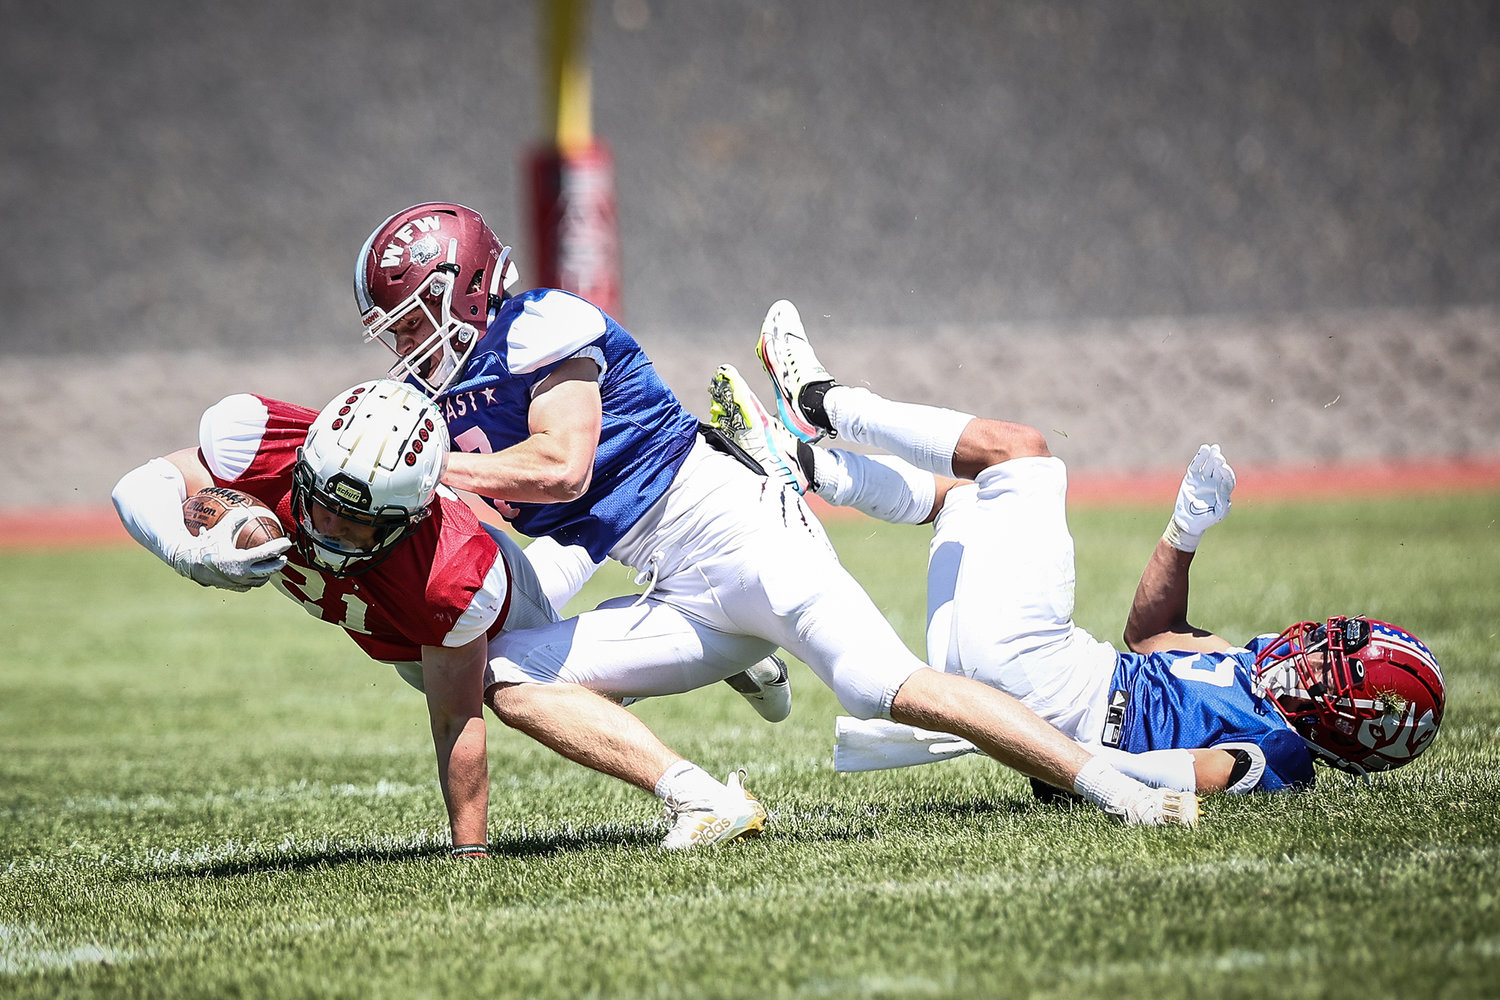 W.F. West's Brock Guyette (7) makes a tackle for the East squad during the Earl Barden All-Star Classic football game Saturday in Yakima.